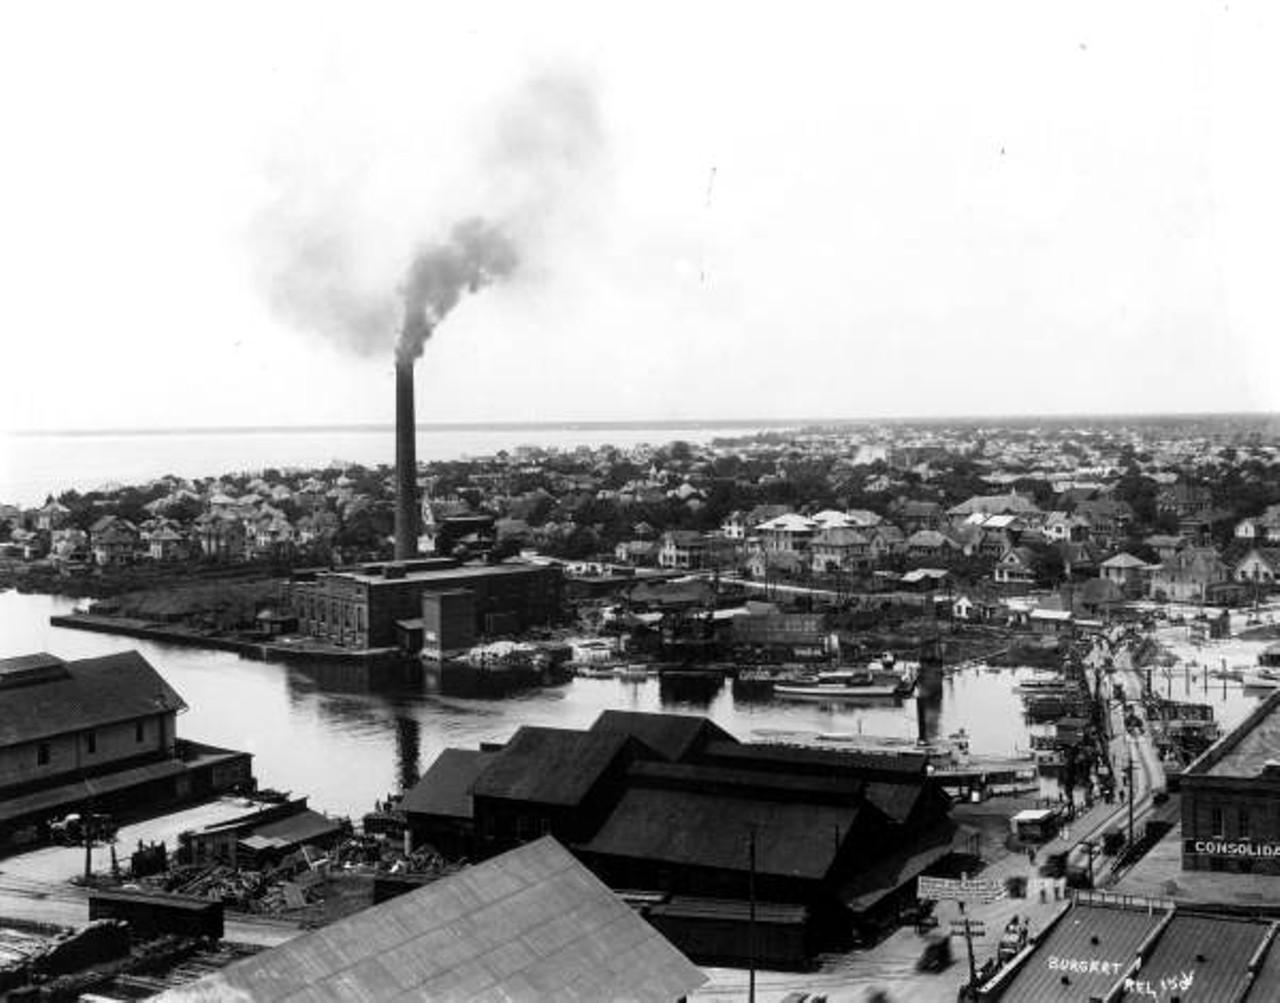 Bird's eye view of Hyde Park from the old Mugge building, 1913